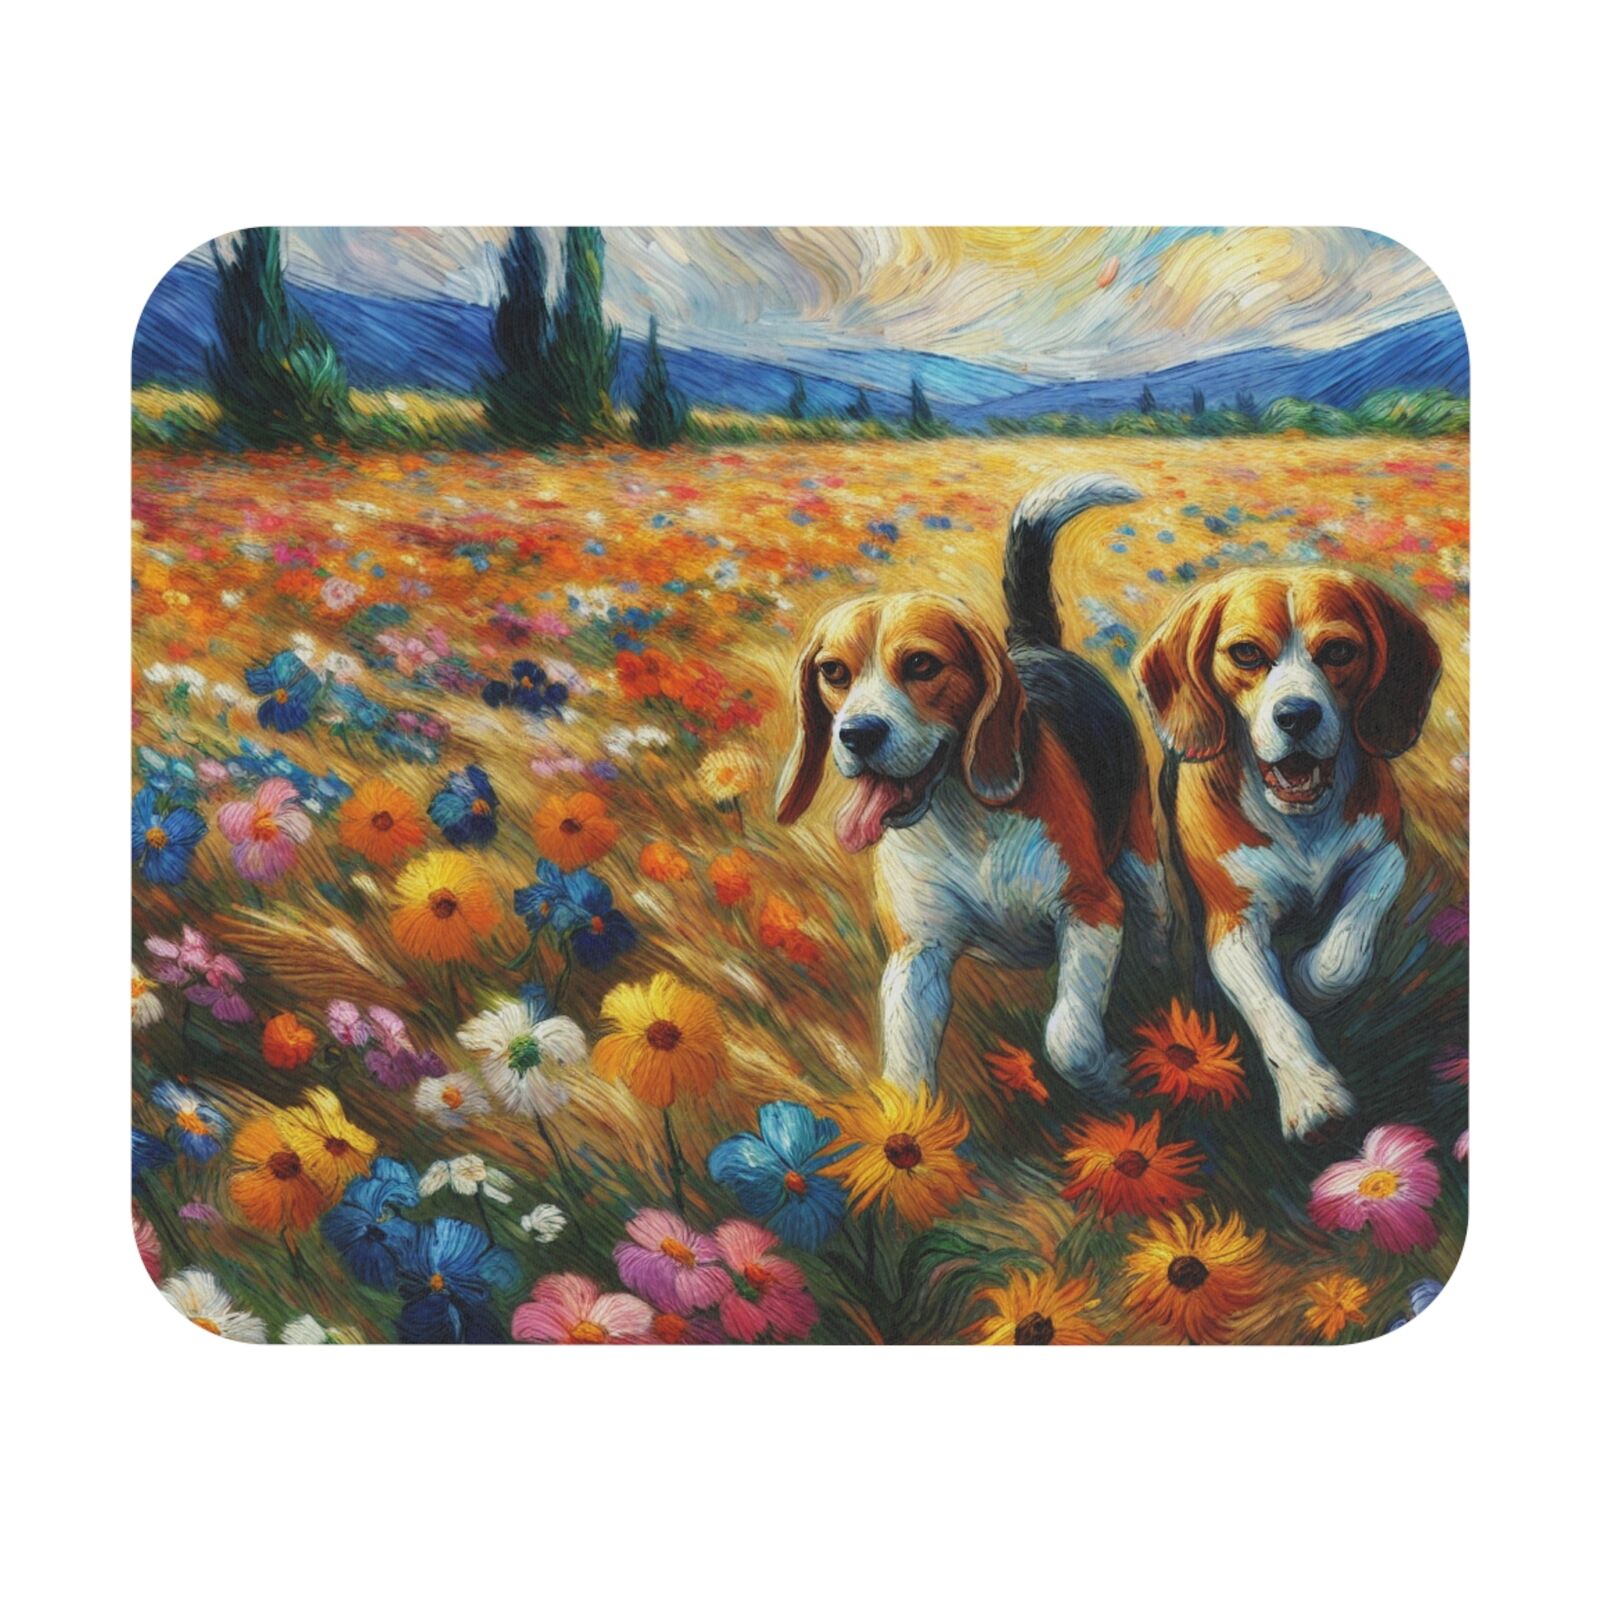 Mouse Pad (Rectangle) Beagles in Field of Flowers Van Gogh Style Design 4